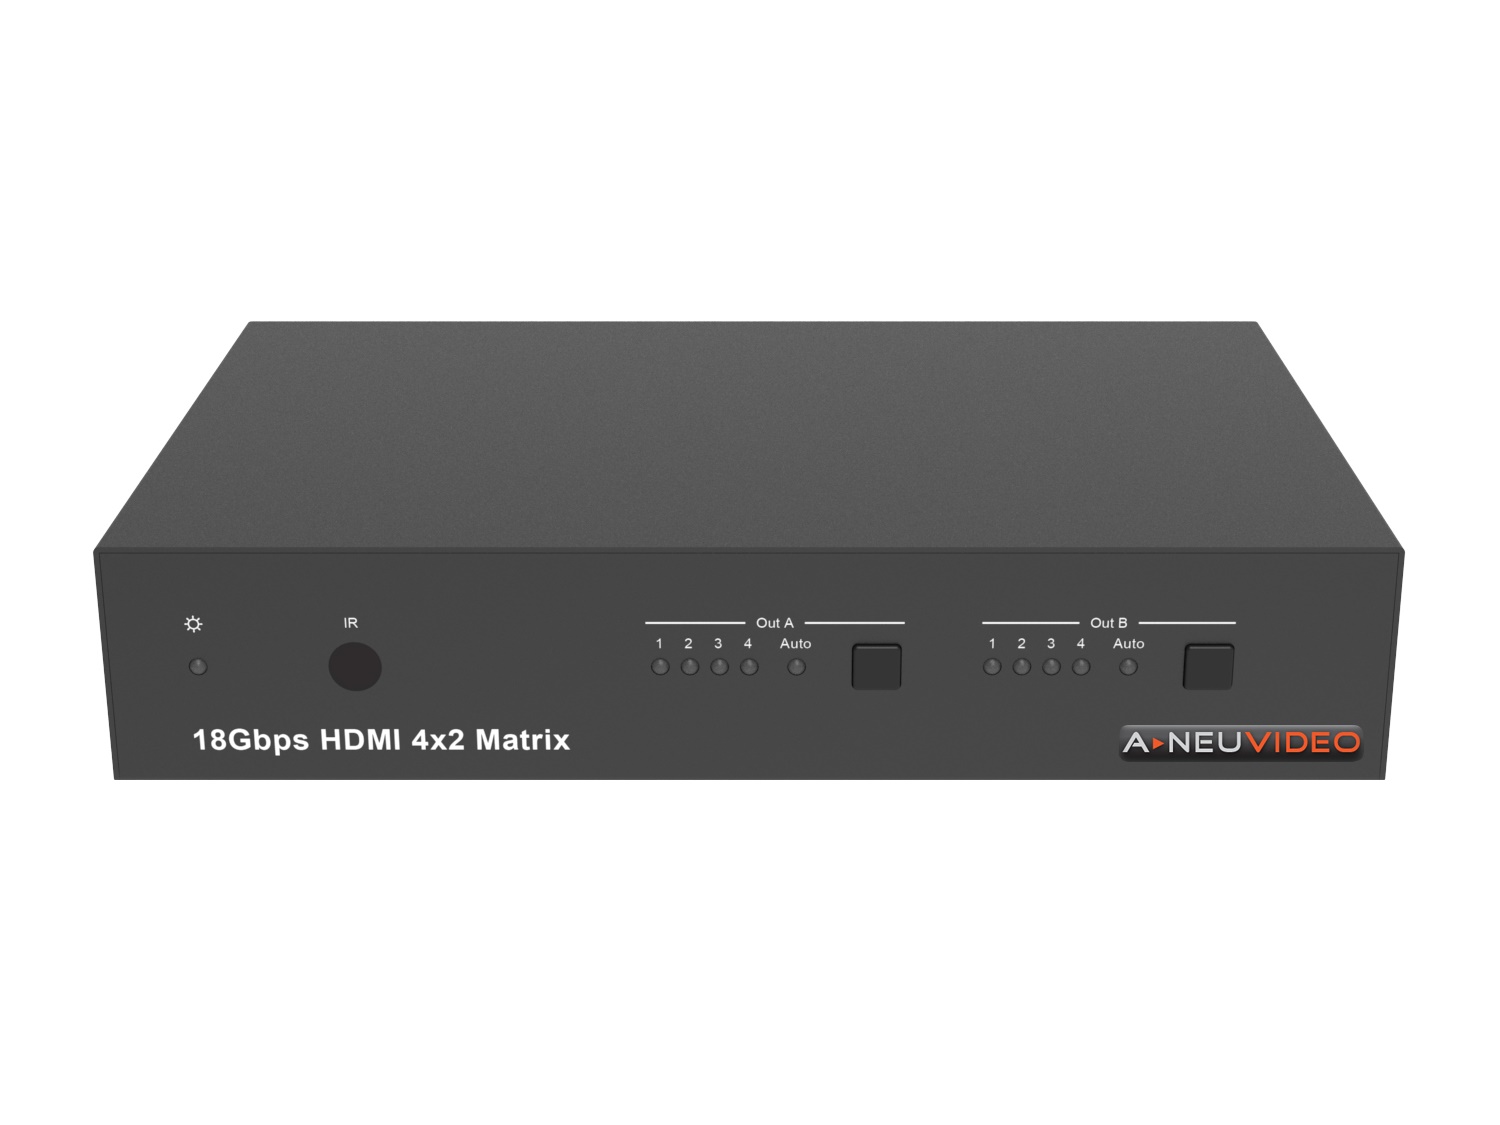 ANI-42HDFIX 4x2 HDMI2.0 18Gbps Matrix Switcher with Scaler/SPDIF/Analog and Web-GUI by A-NeuVideo